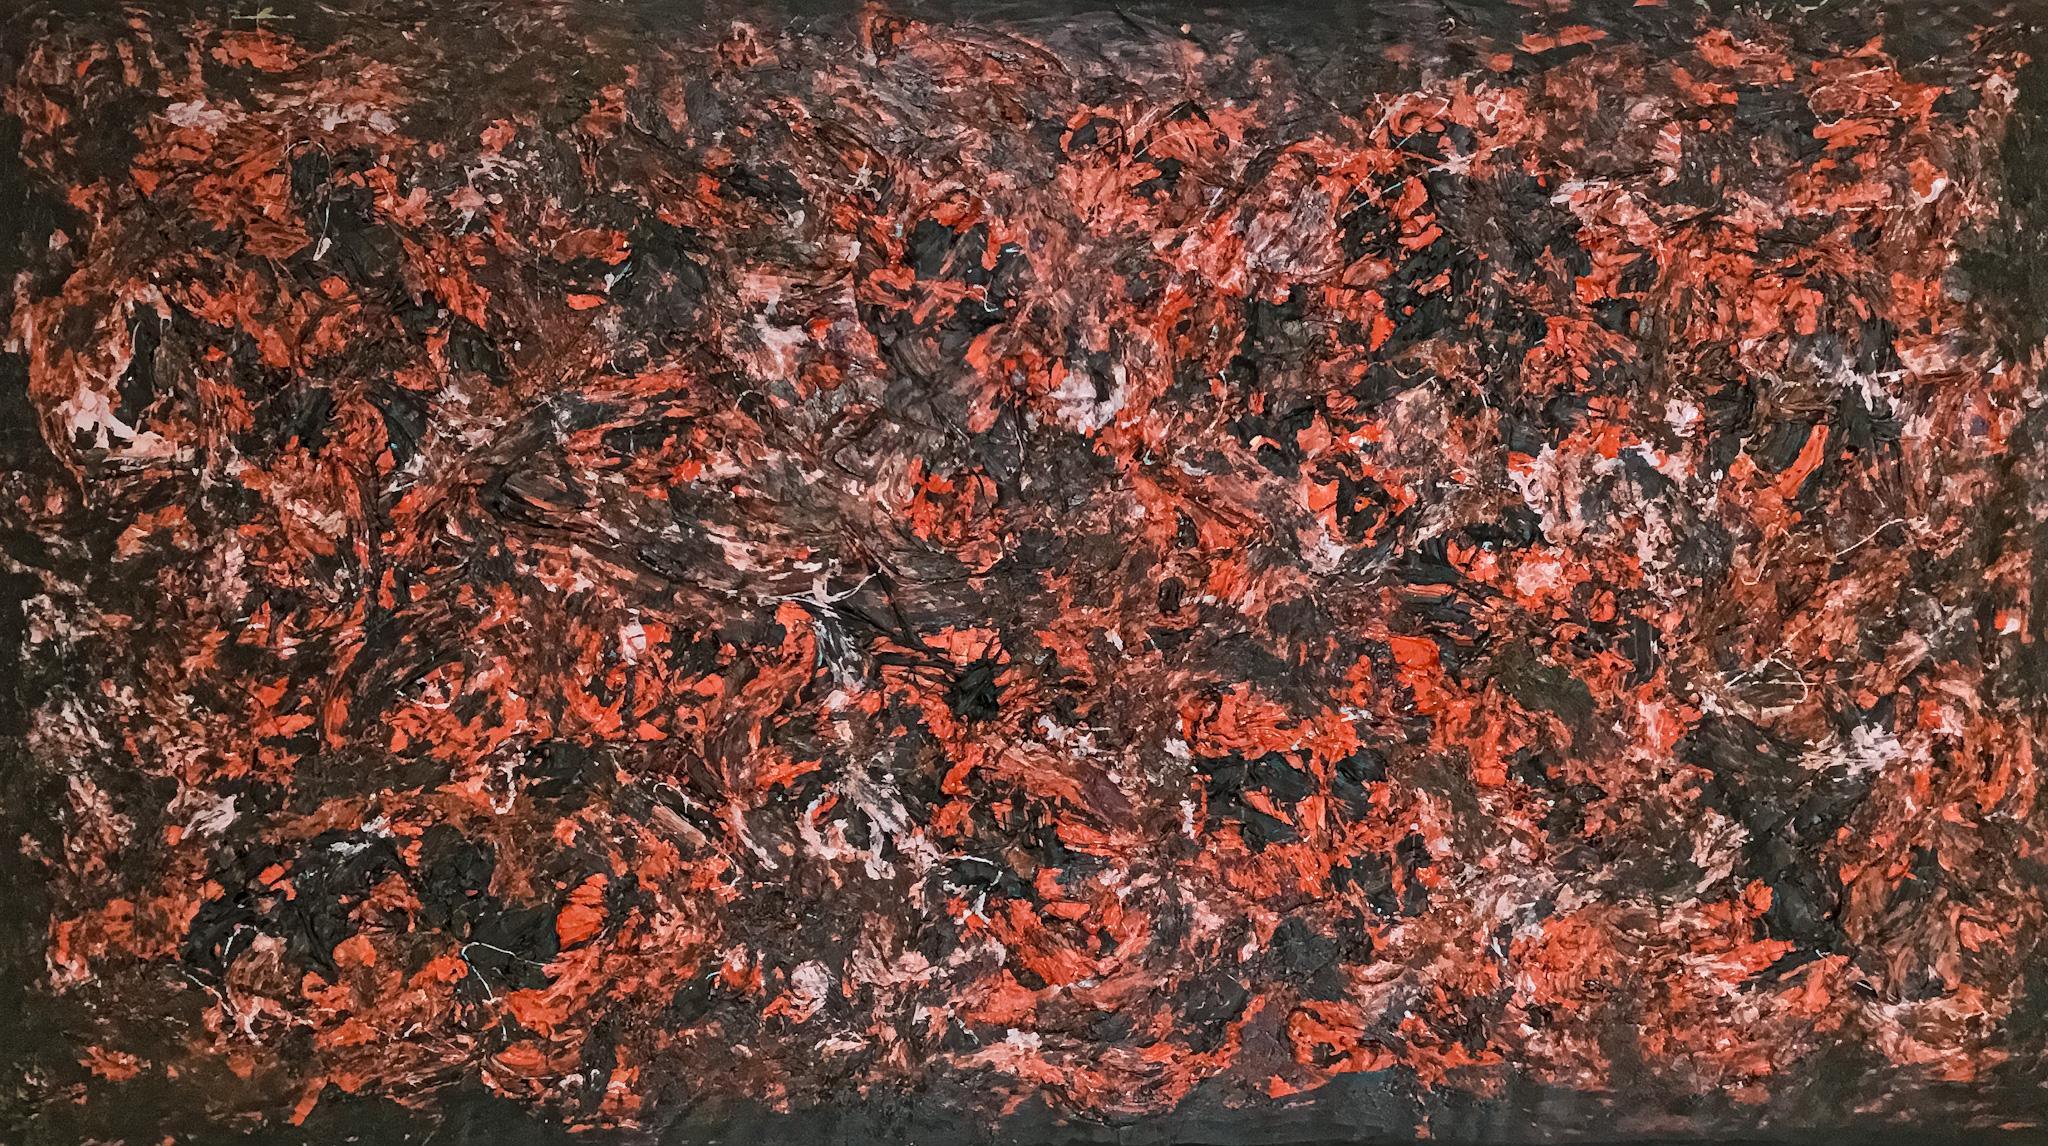 Impasto Polyurethane Abstract Painting on Canvas "The Devil's Playground"